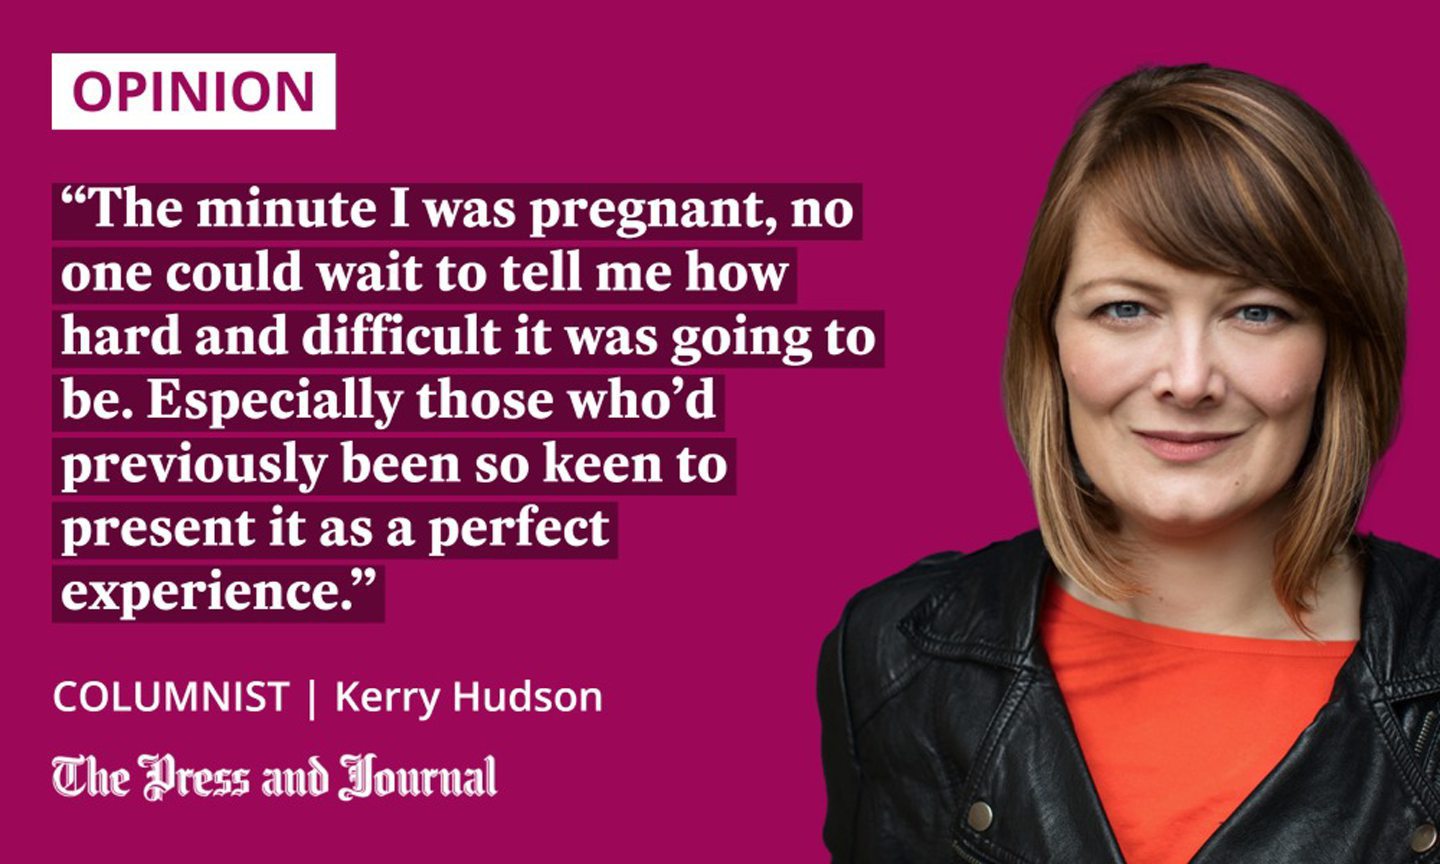 Columnist, Kerry Hudson, speaks about preganancy "The minute I was pregnant, no one could wait to tell me how hard and difficult it was going to be. Especially those who’d previously been so keen to present it as a perfect experience."